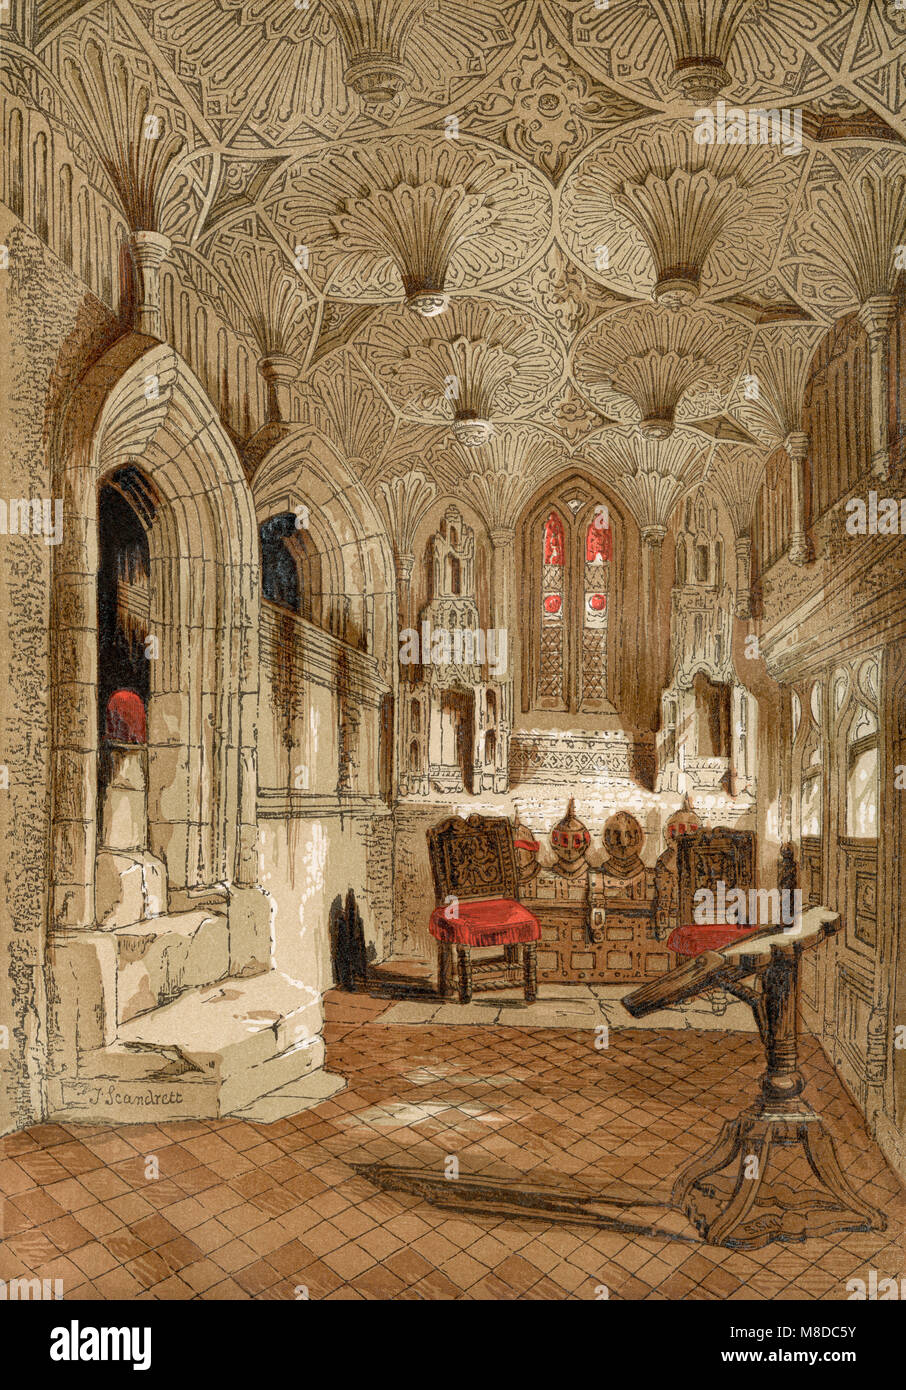 The Chantry Capel, Collegiate Church of St Mary, Warwick, England.  This chapel adjoins the Beauchamp Chapel where the effigial monument of Robert Dudley, 1st Earl of Leicester can be found.  From Old England: A Pictorial Museum, published 1847. Stock Photo